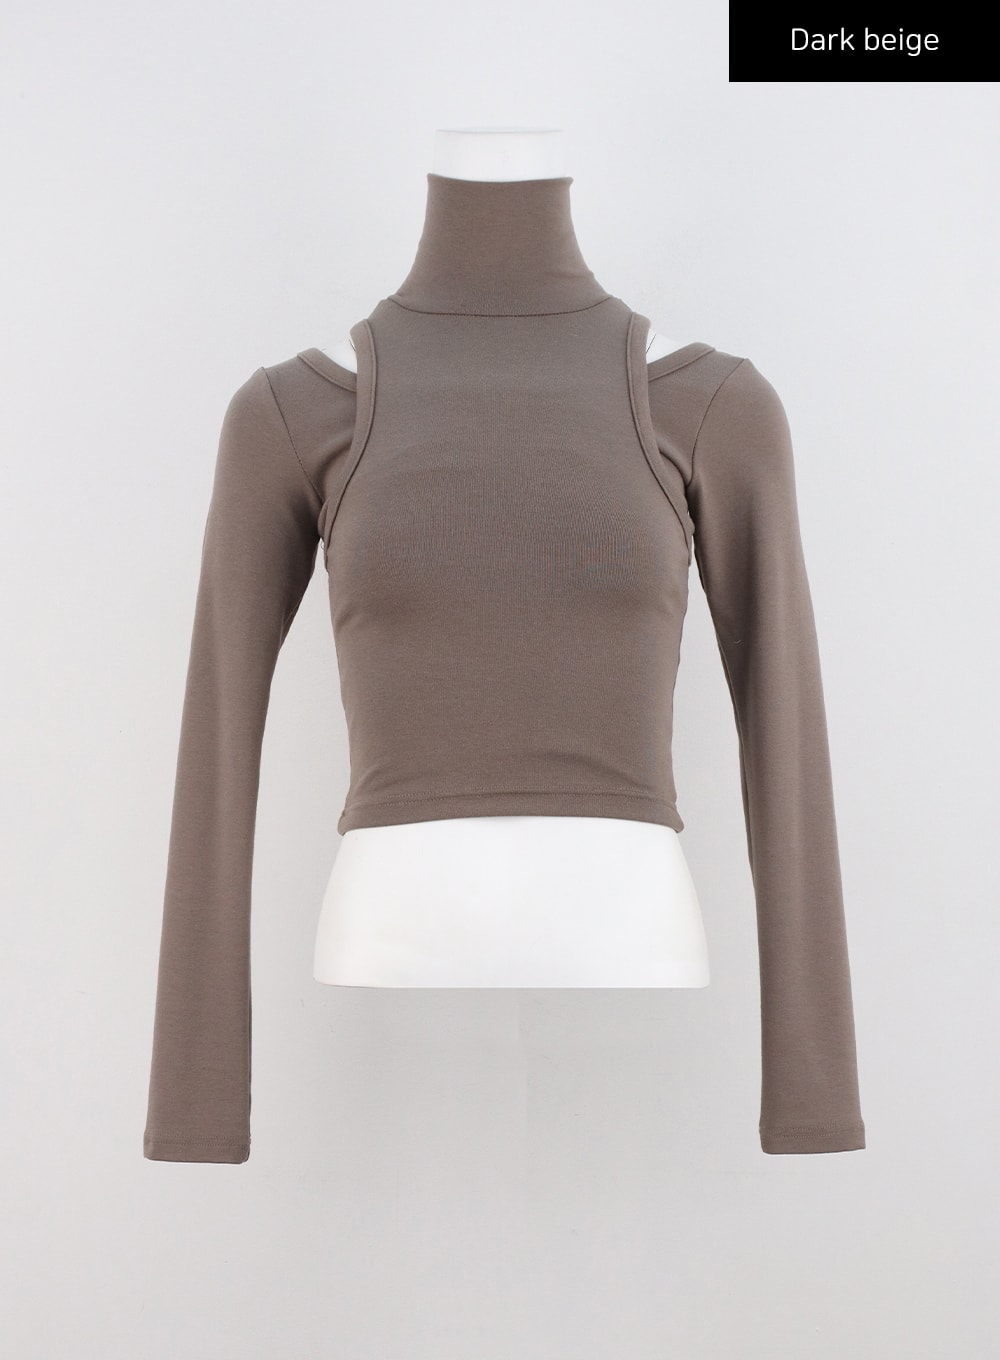 turtle-neck-cut-out-long-sleeve-top-cn314